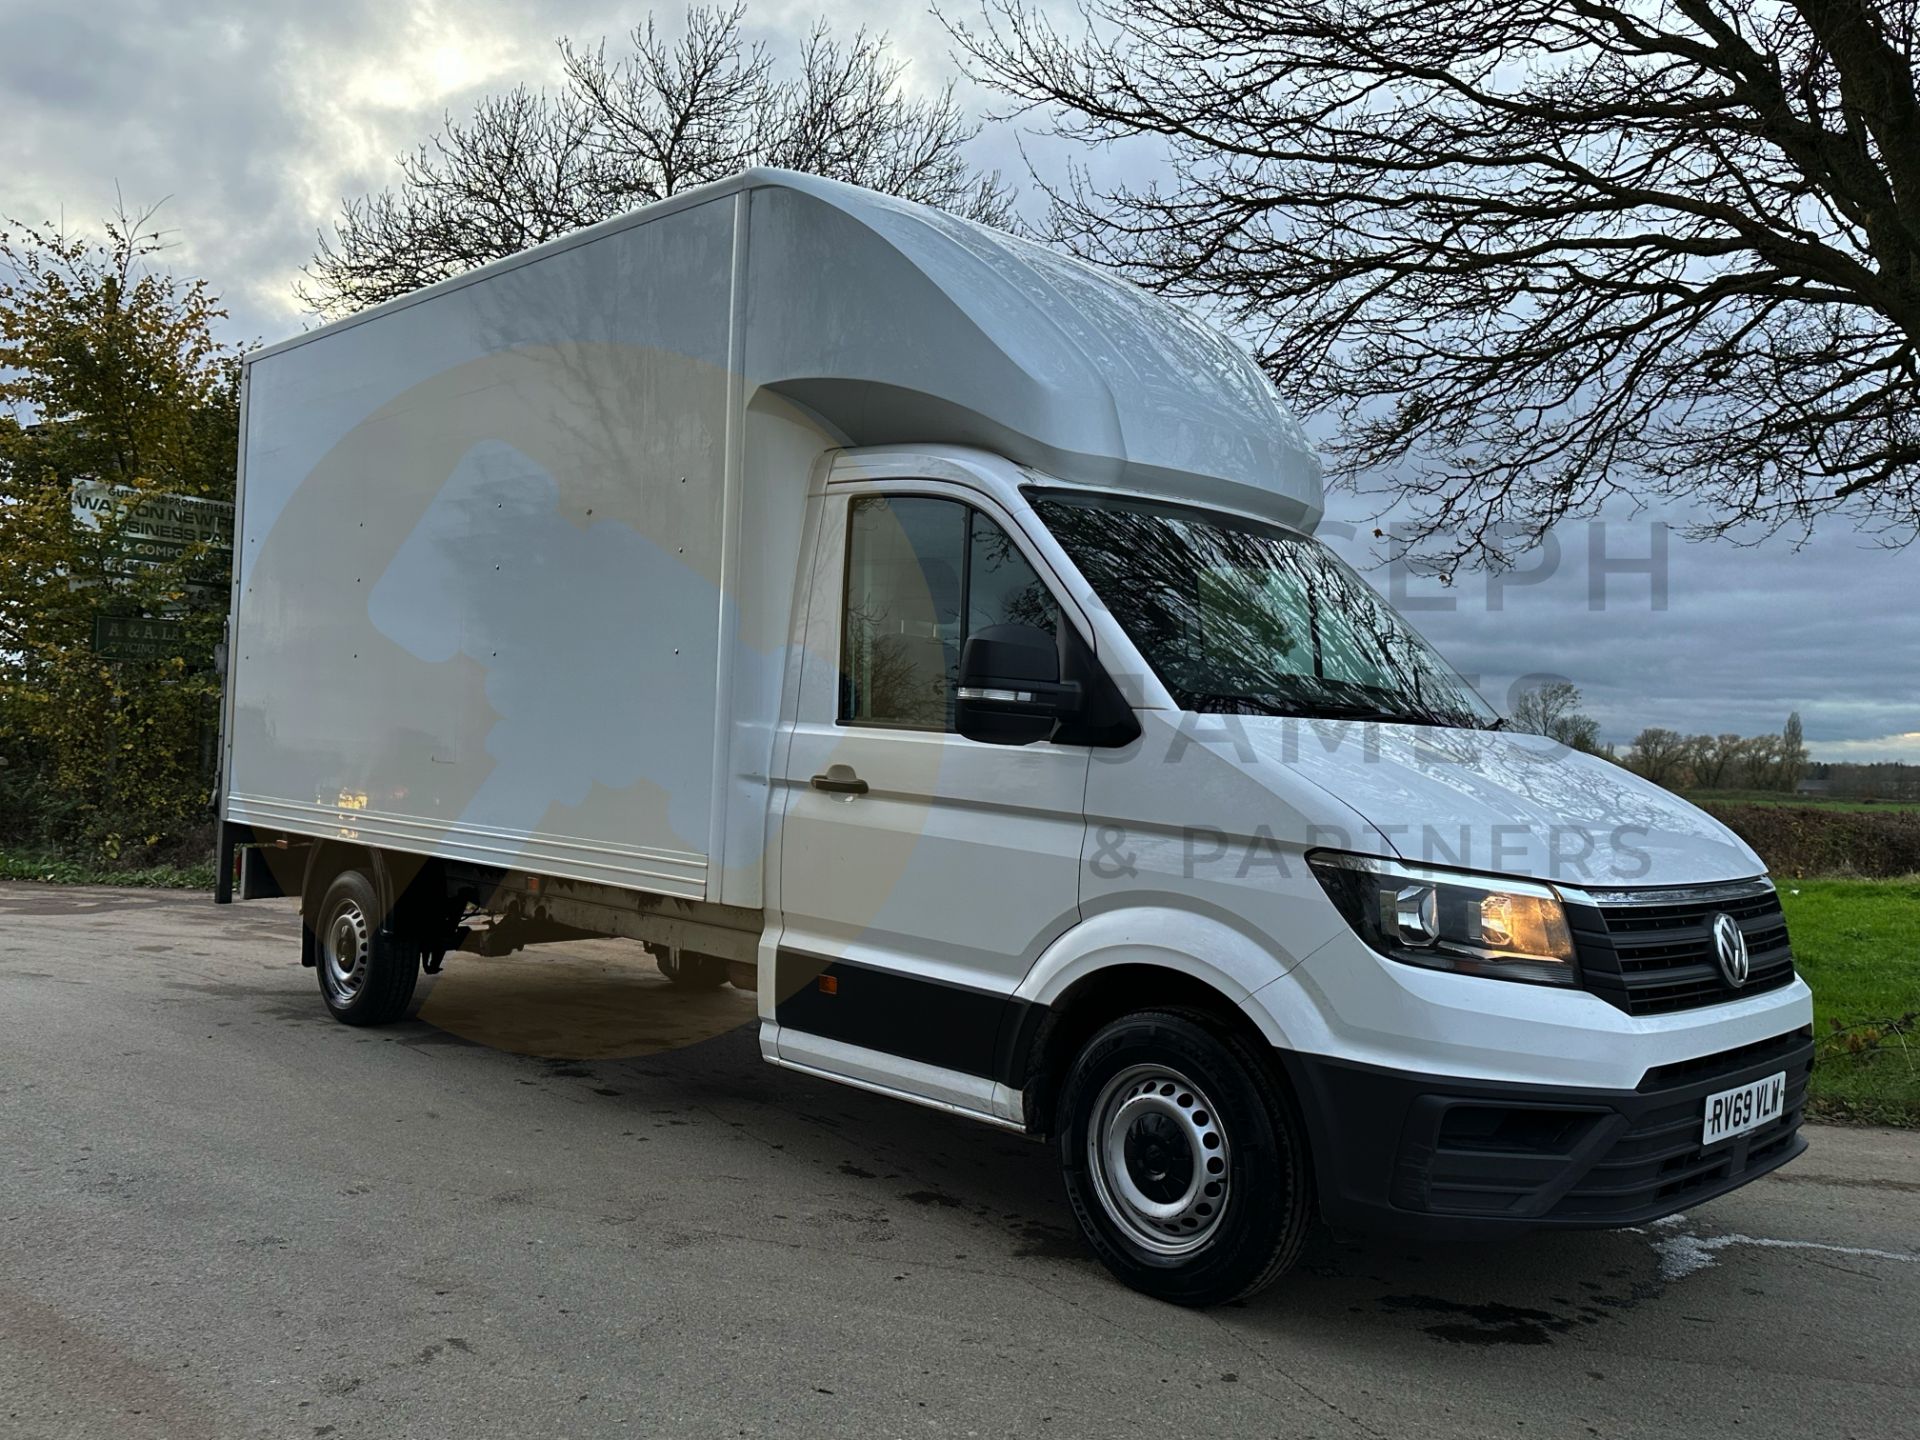 (ON SALE) VOLKSWAGEN CRAFTER CR35 *LUTON / BOX VAN* (2020 - EURO 6) 2.0 TDI - 6 SPEED *TAIL-LIFT* - Image 3 of 38